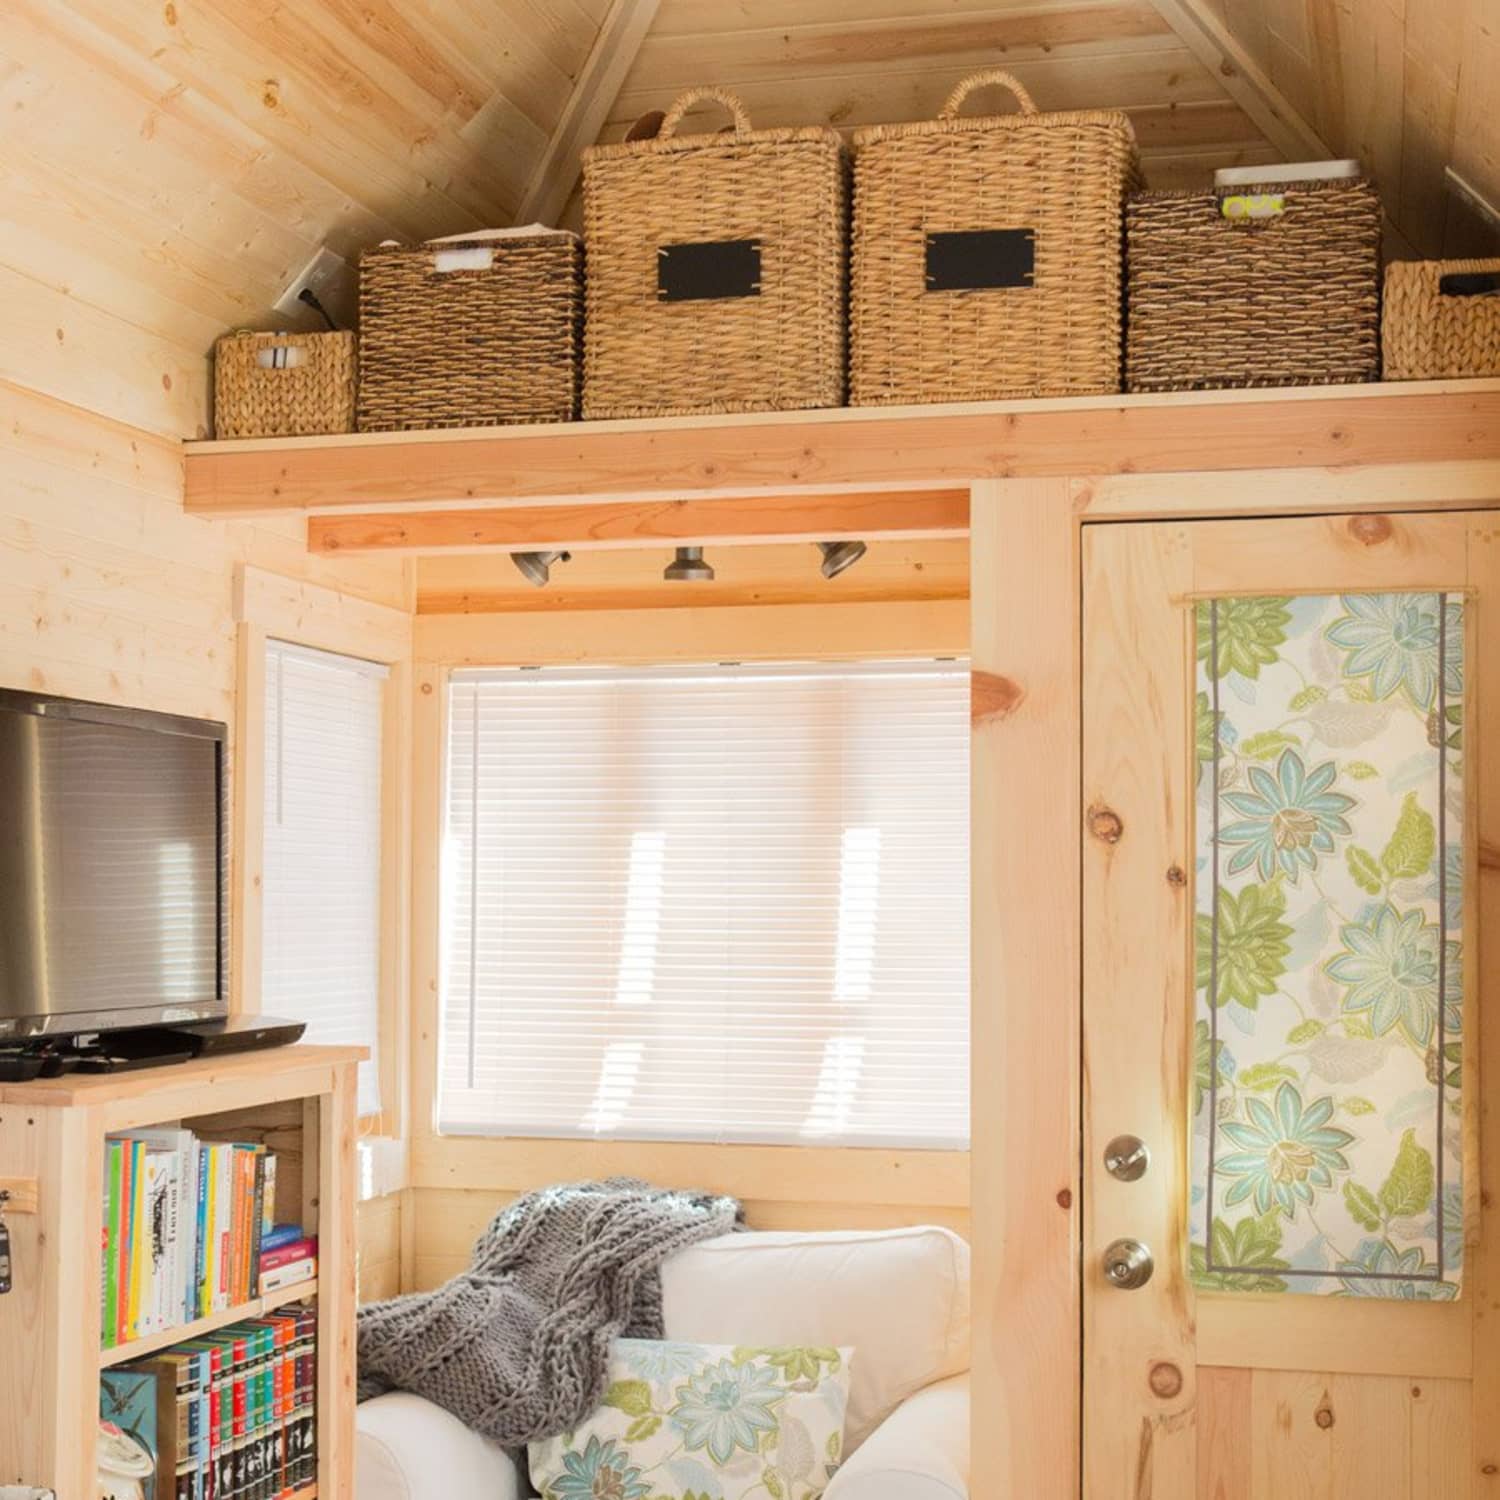 Loving the idea of tiny house living, even if you don't live in one